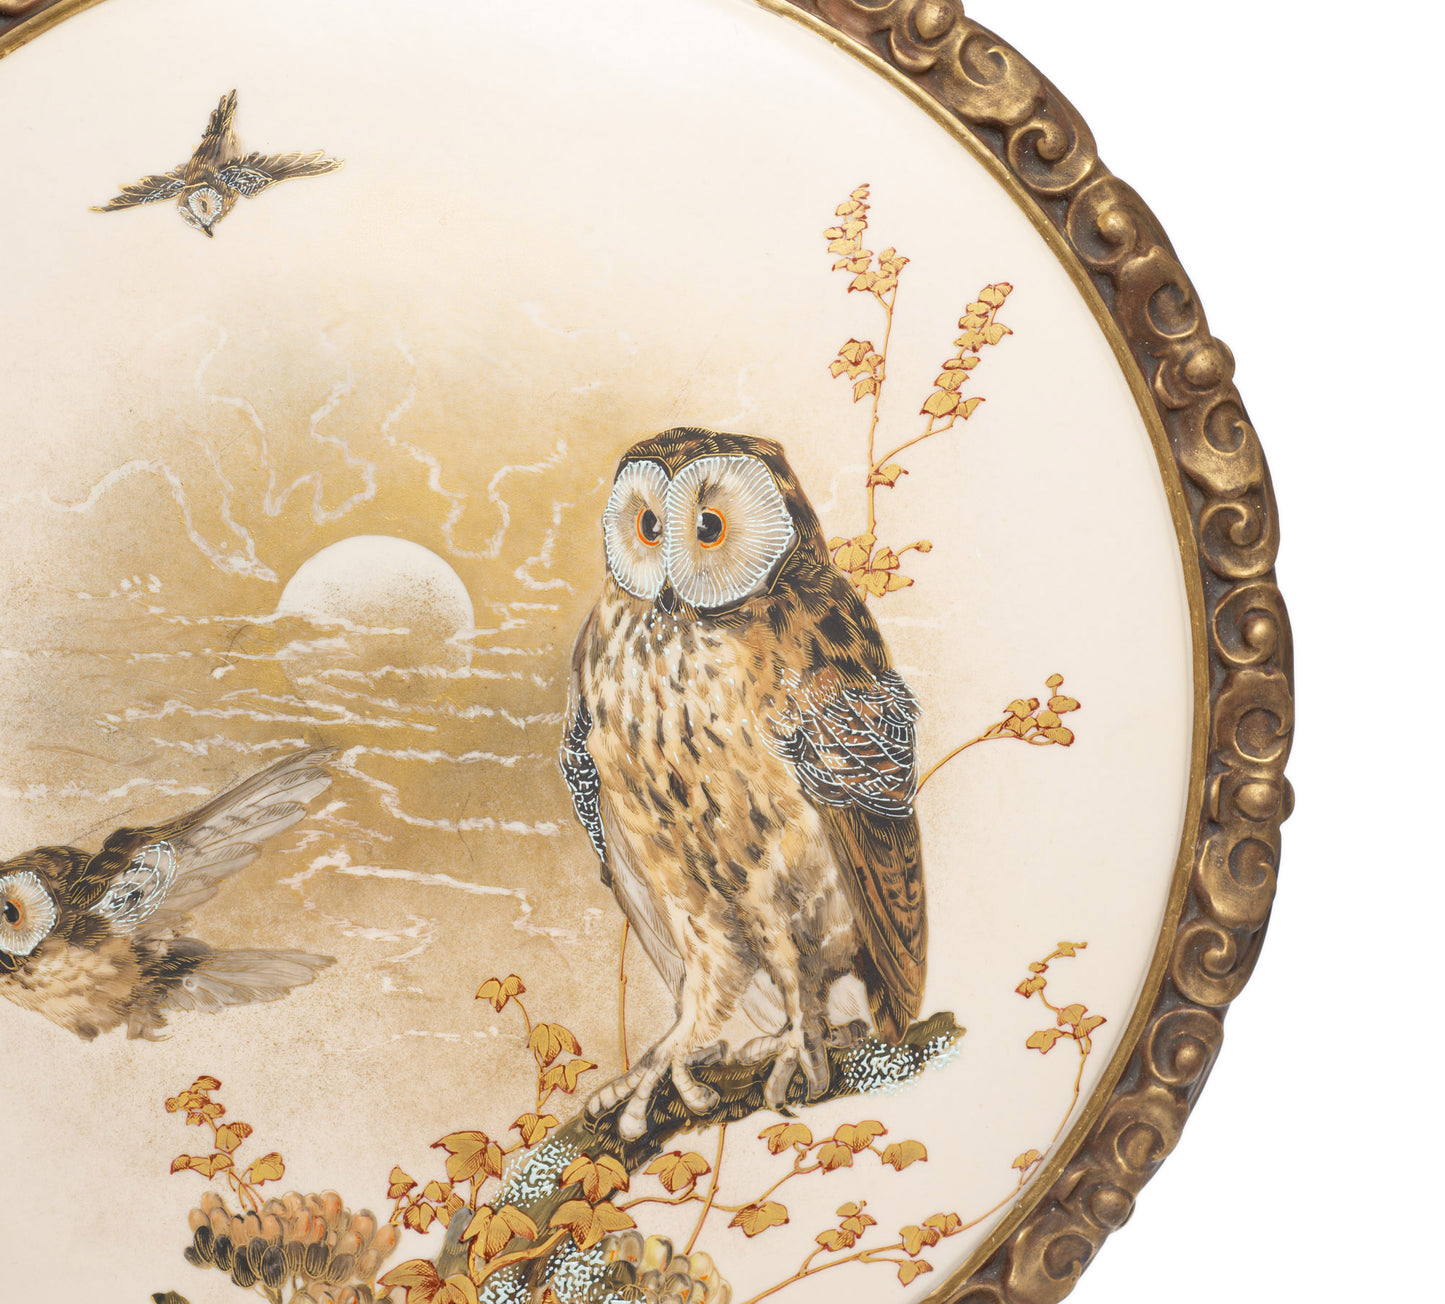 Antique Royal Worcester Moonlit Owl Wall Plaque by Charles Baldwyn c1885 (Code 2601)